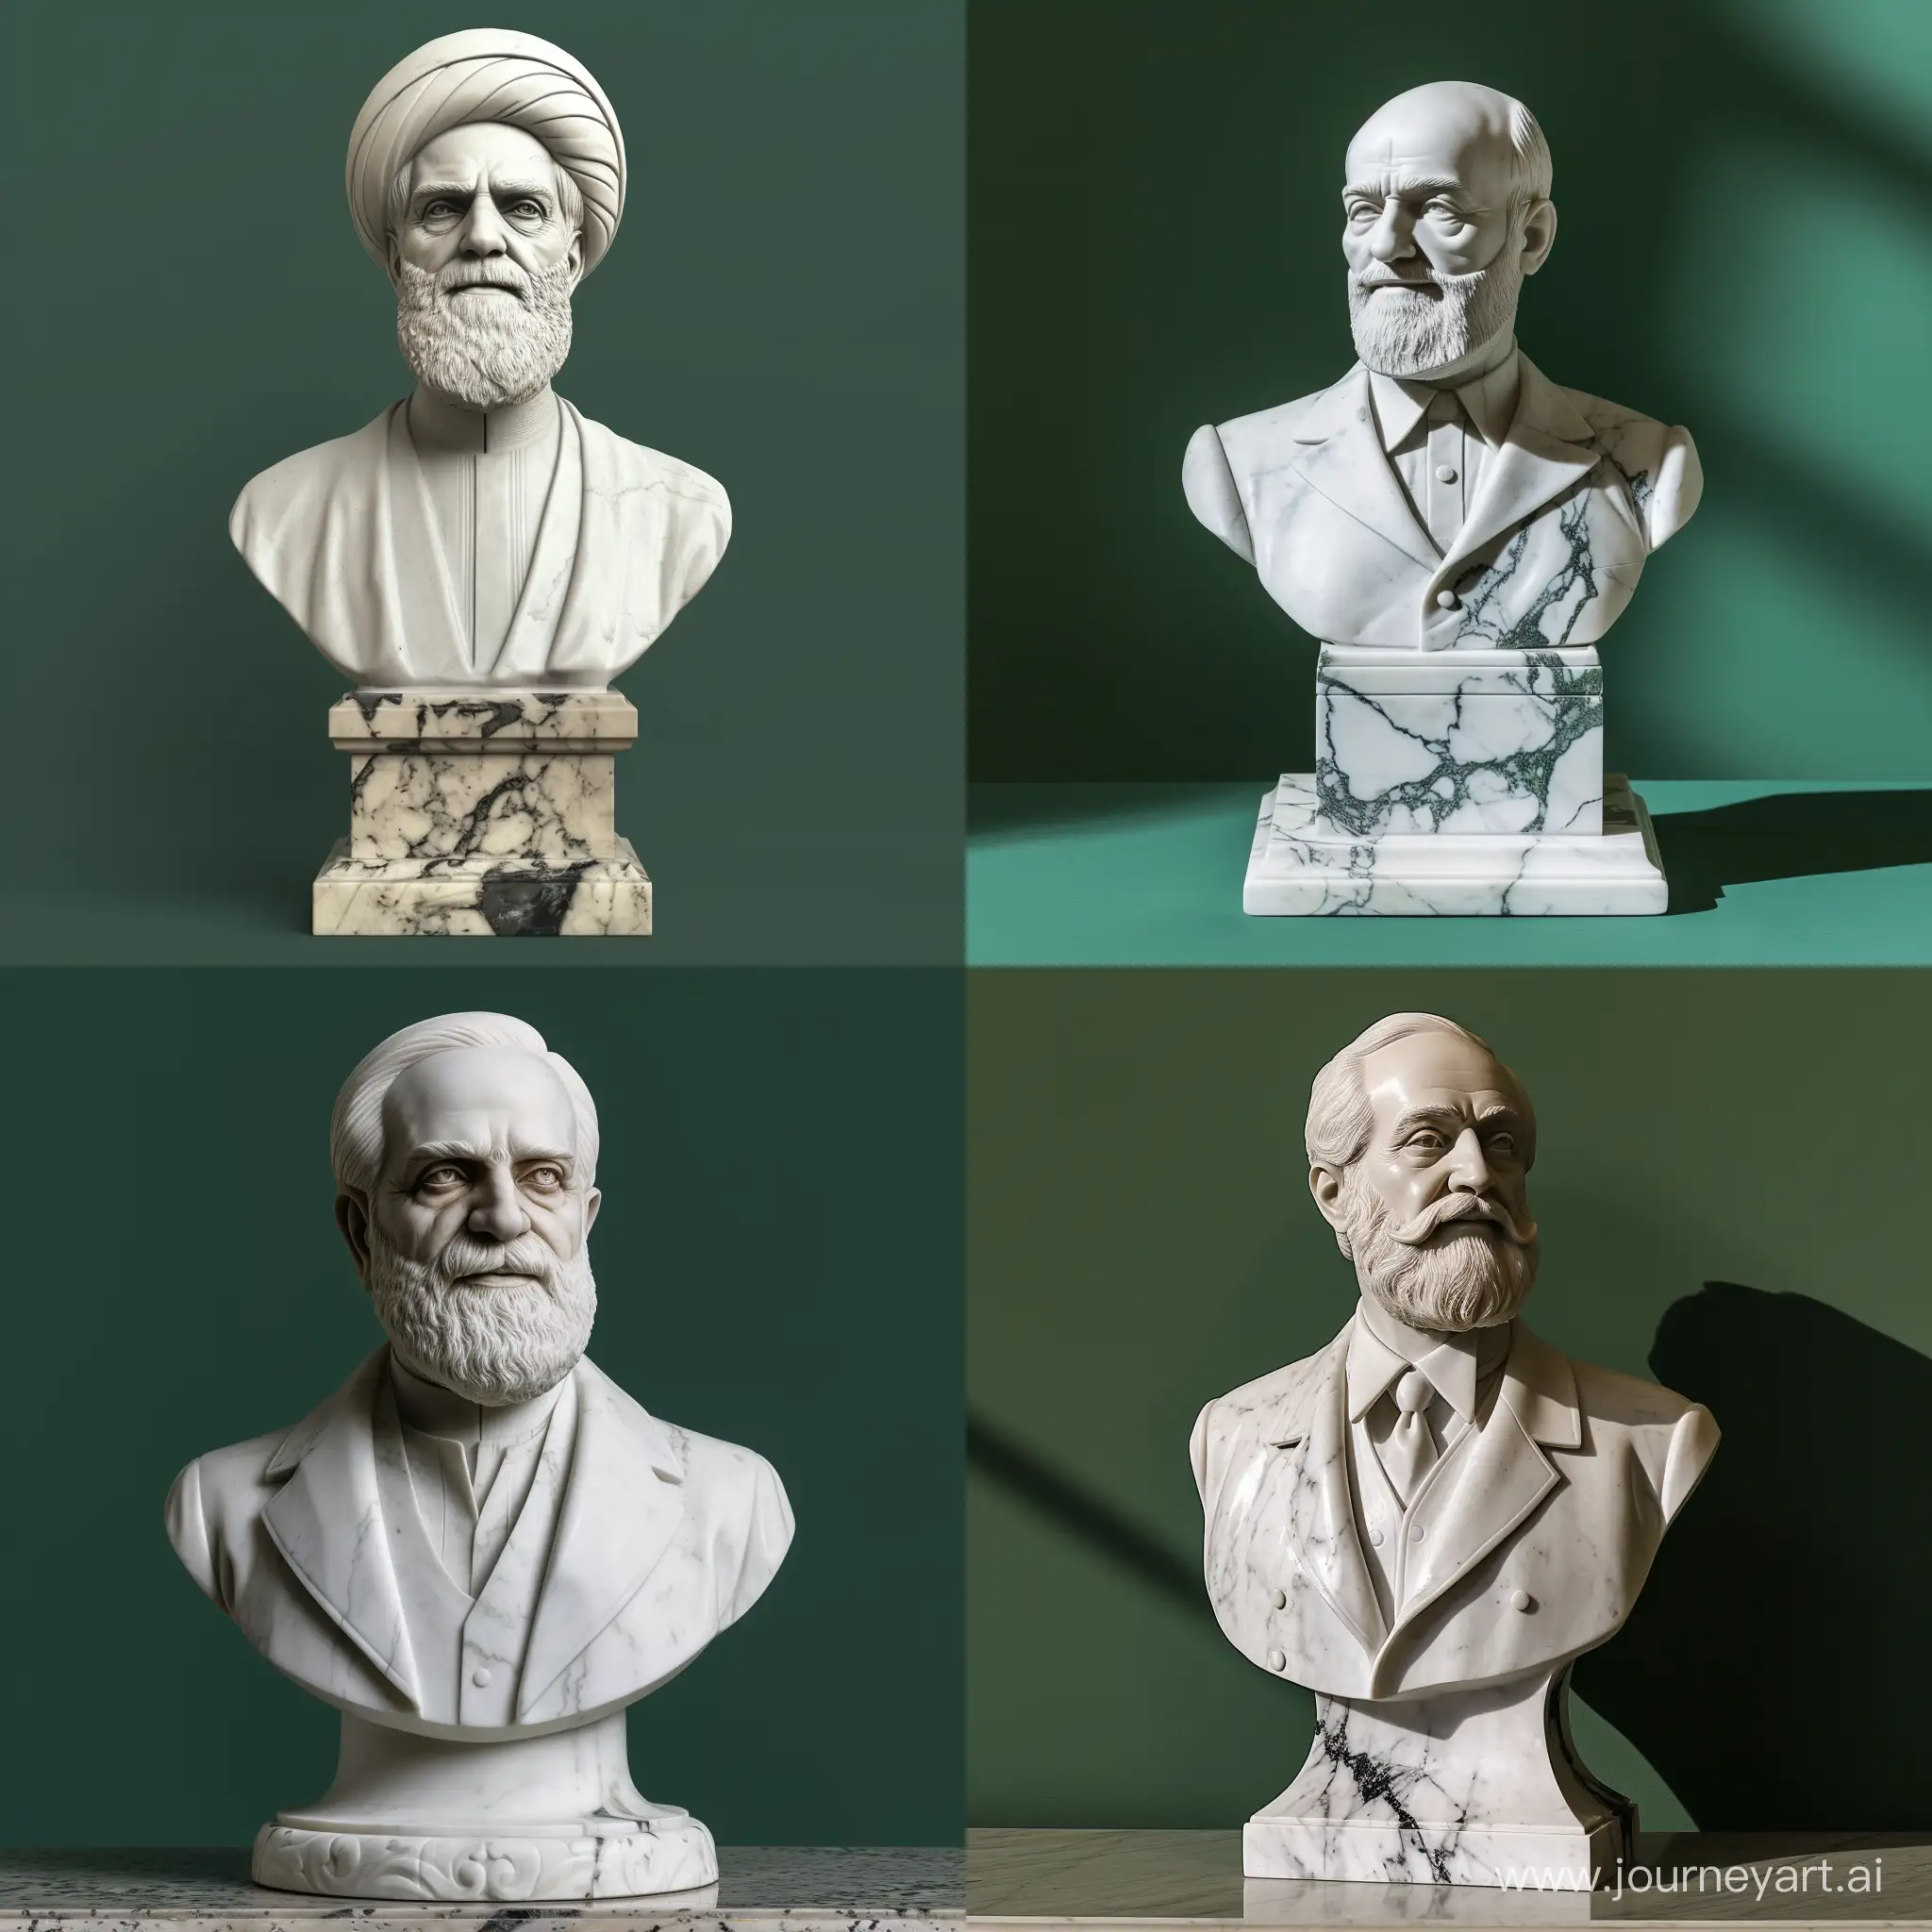 Amir-Kabir-Prime-Minister-Sculpture-in-Cinematic-Pose-on-White-Marble